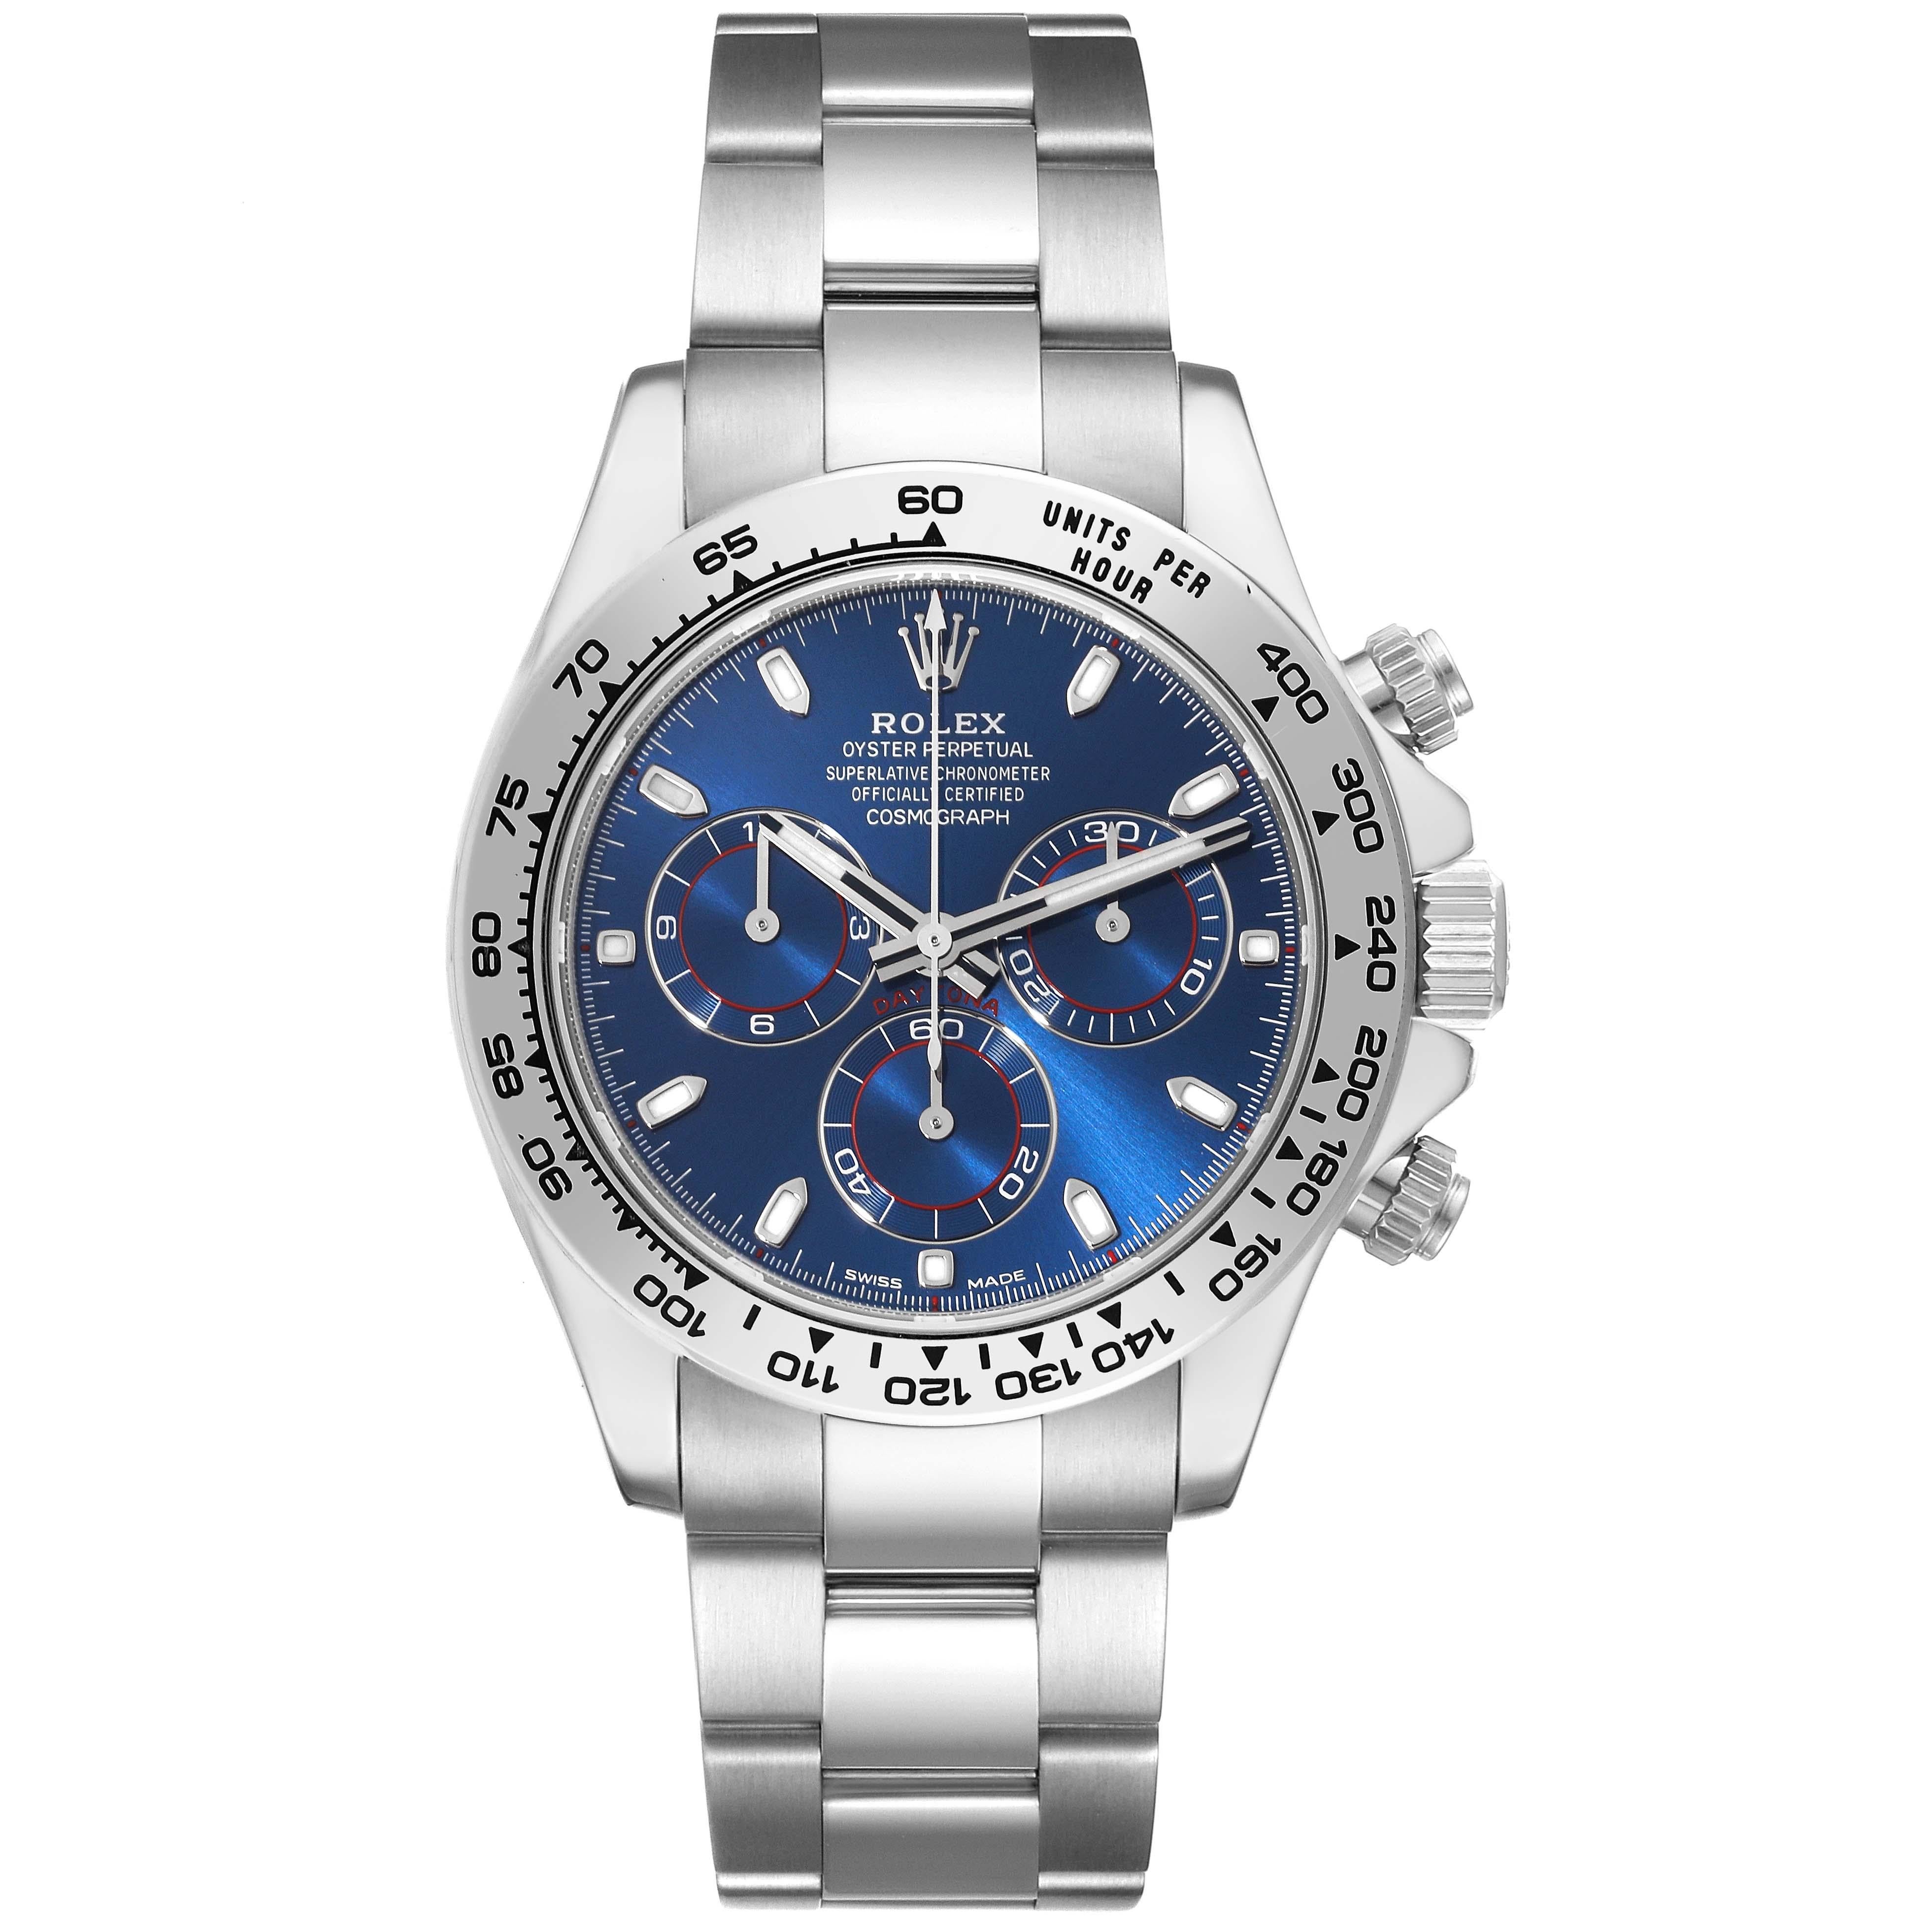 Rolex Daytona Blue Dial White Gold Chronograph Mens Watch 116509. Officially certified chronometer self-winding movement. Rhodium-plated, 44 jewels, straight line lever escapement, monometallic balance adjusted to temperatures and 5 positions, shock